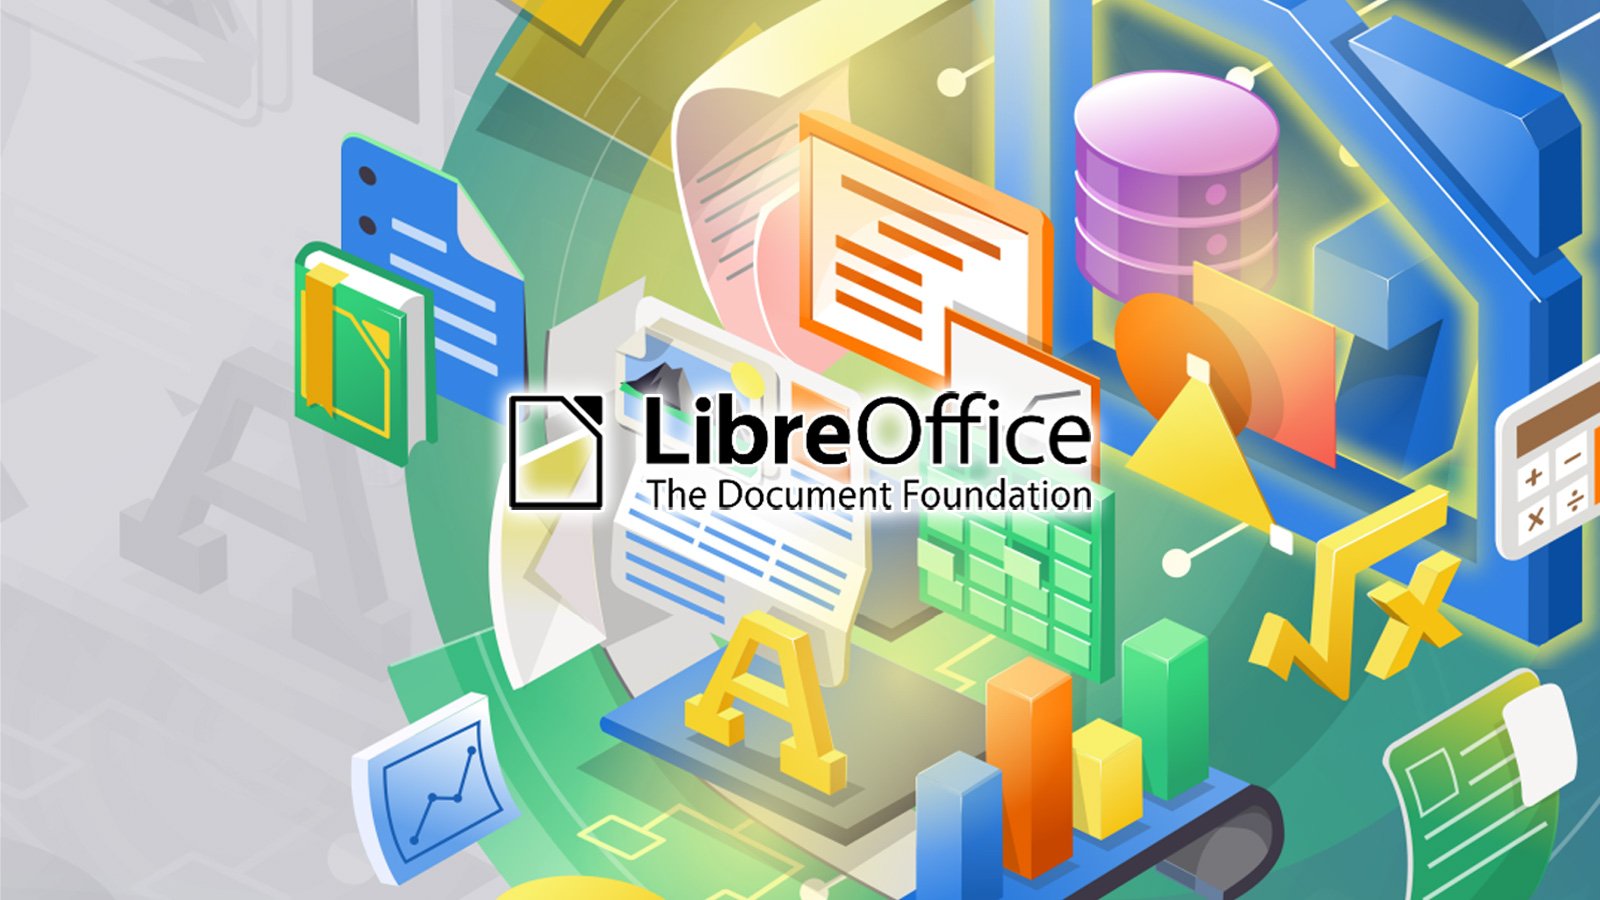 LibreOffice logo on a colorful background